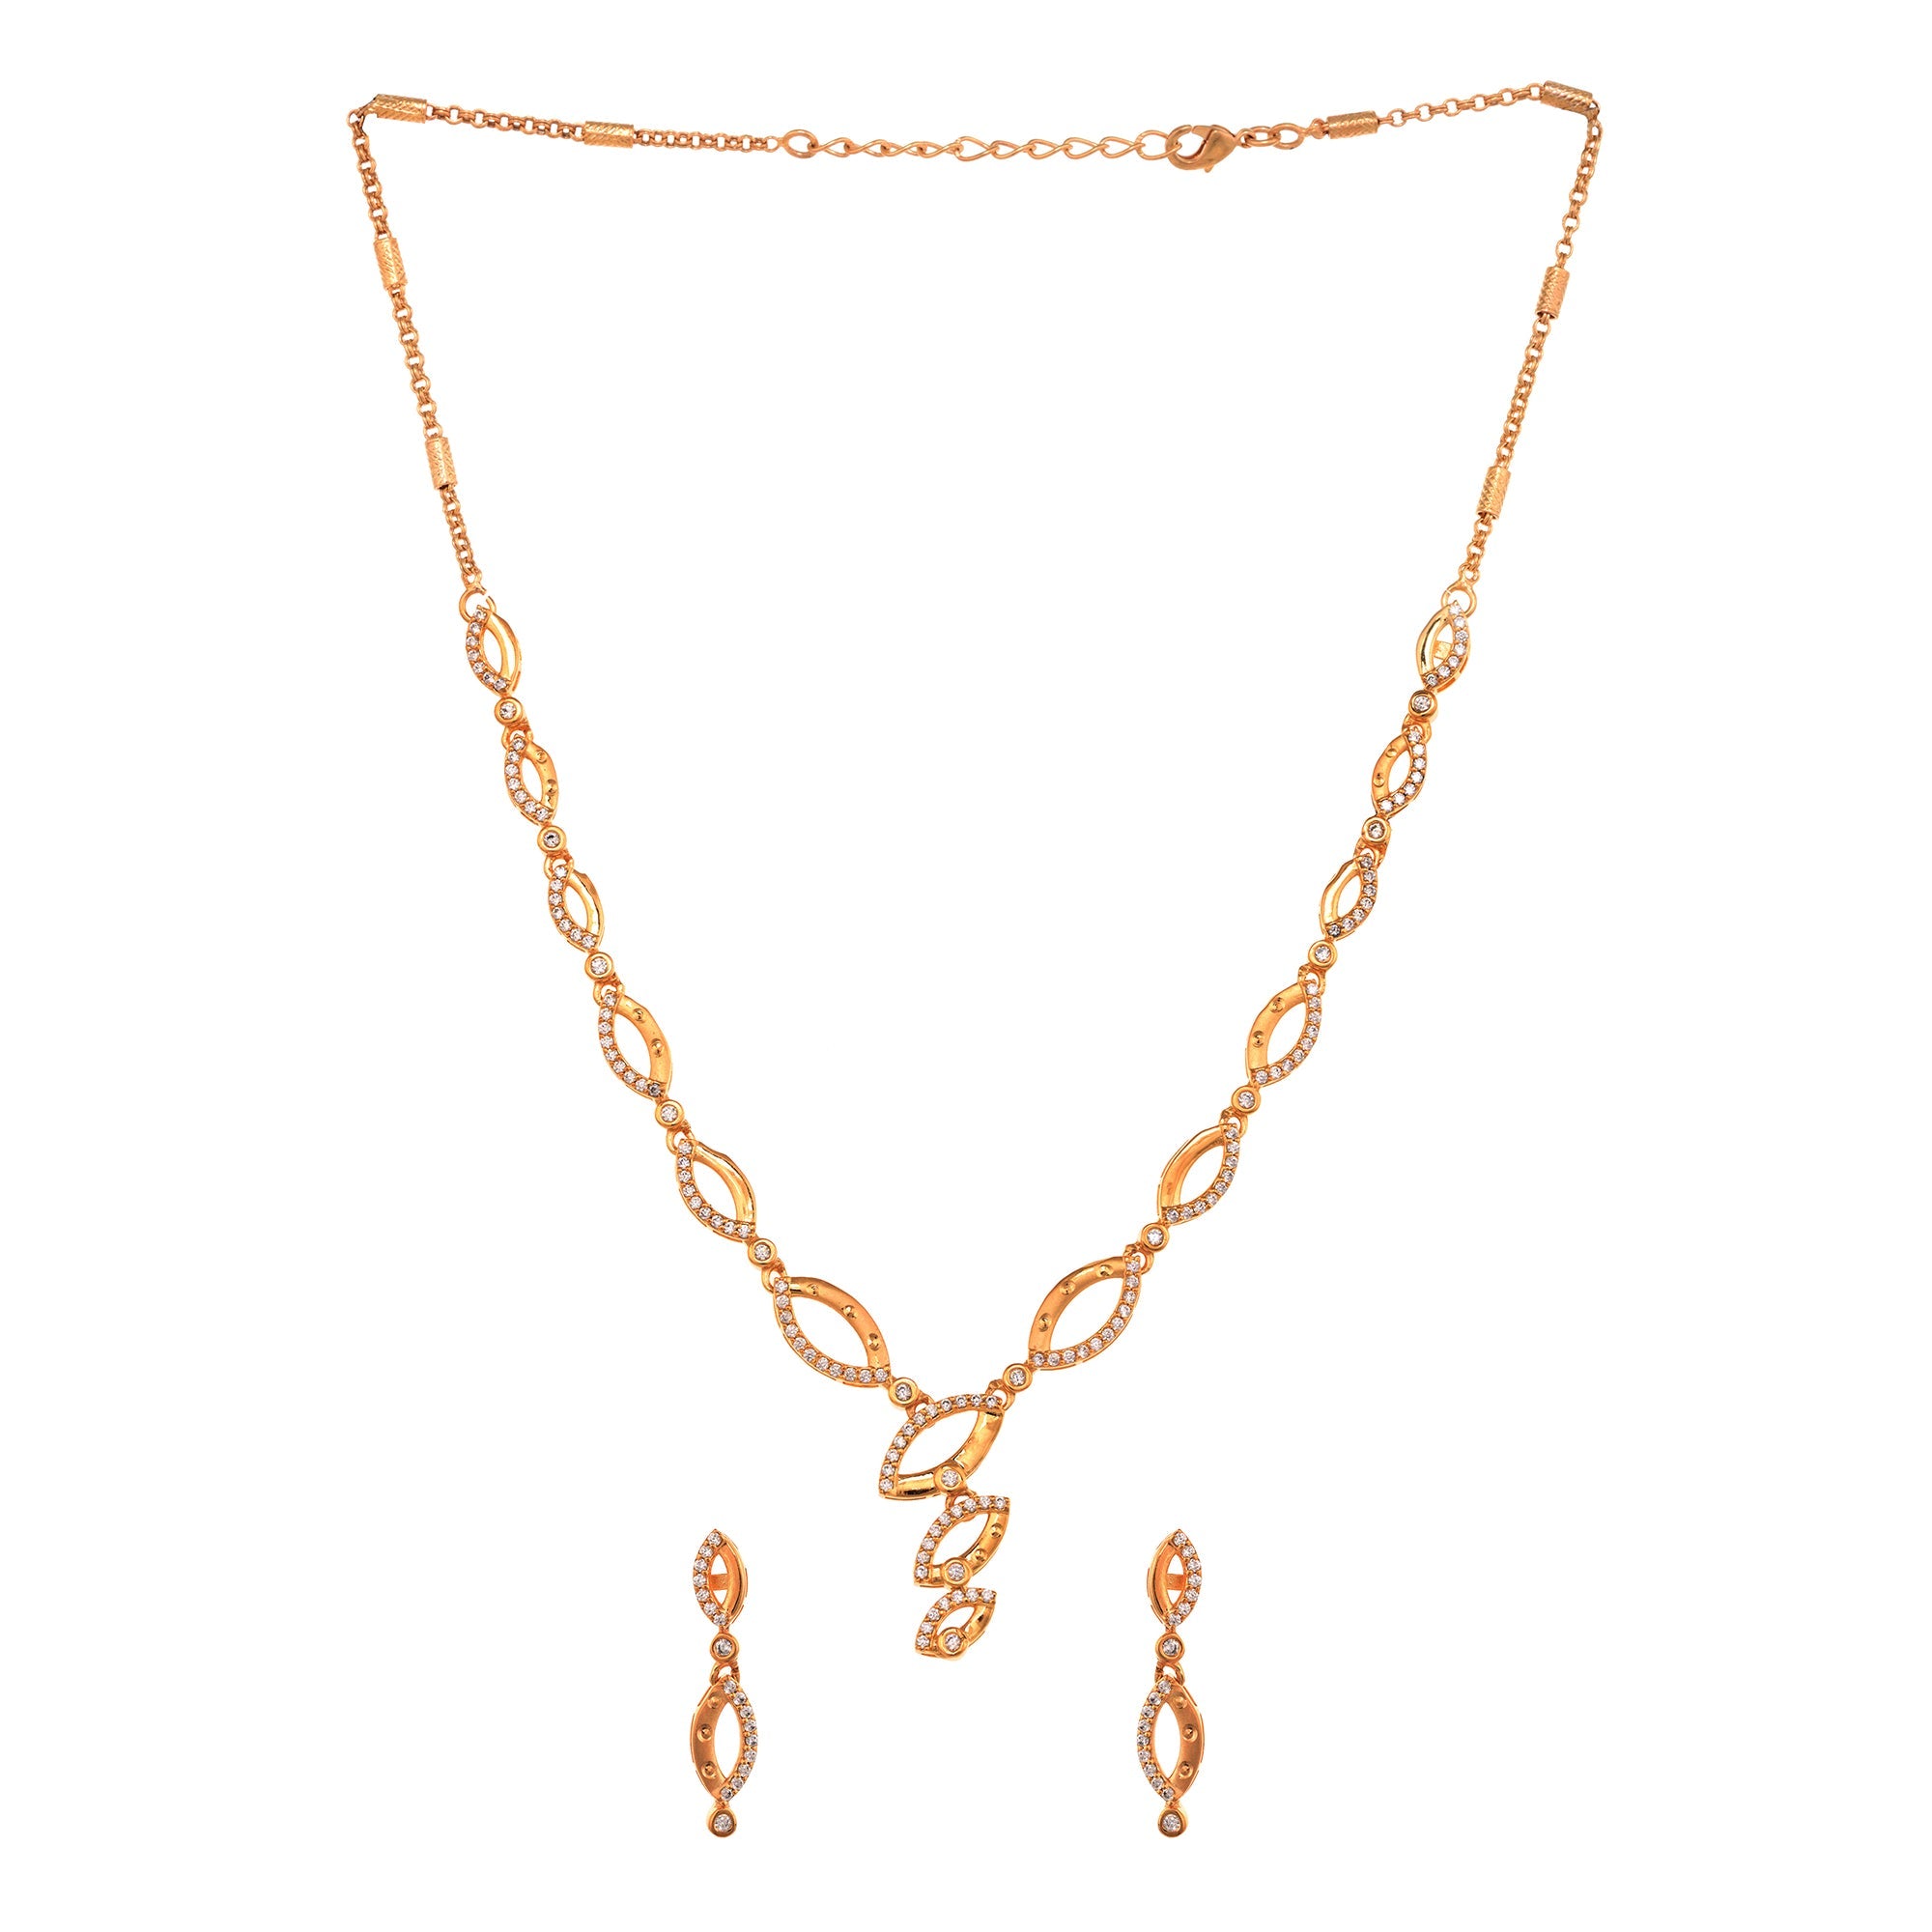 Wavy Gold Necklace | Handmade by Delia Langan Jewelry